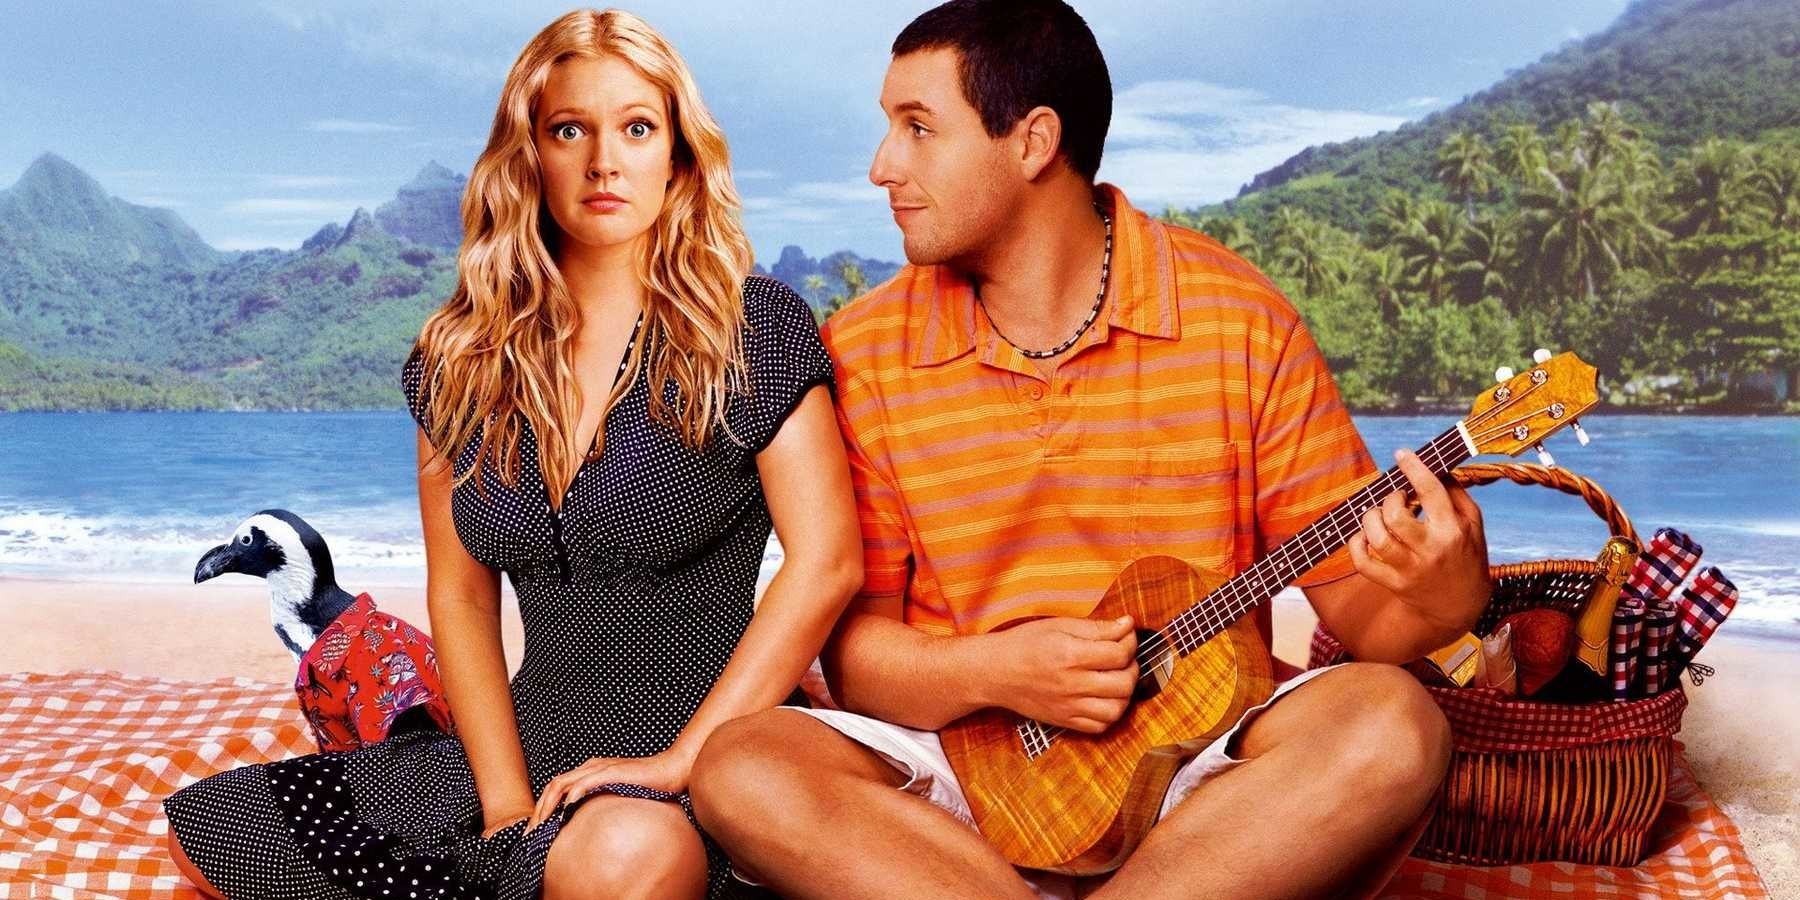 Drew Barrymore and Adam Sandler sitting on a beach in 50 First Dates